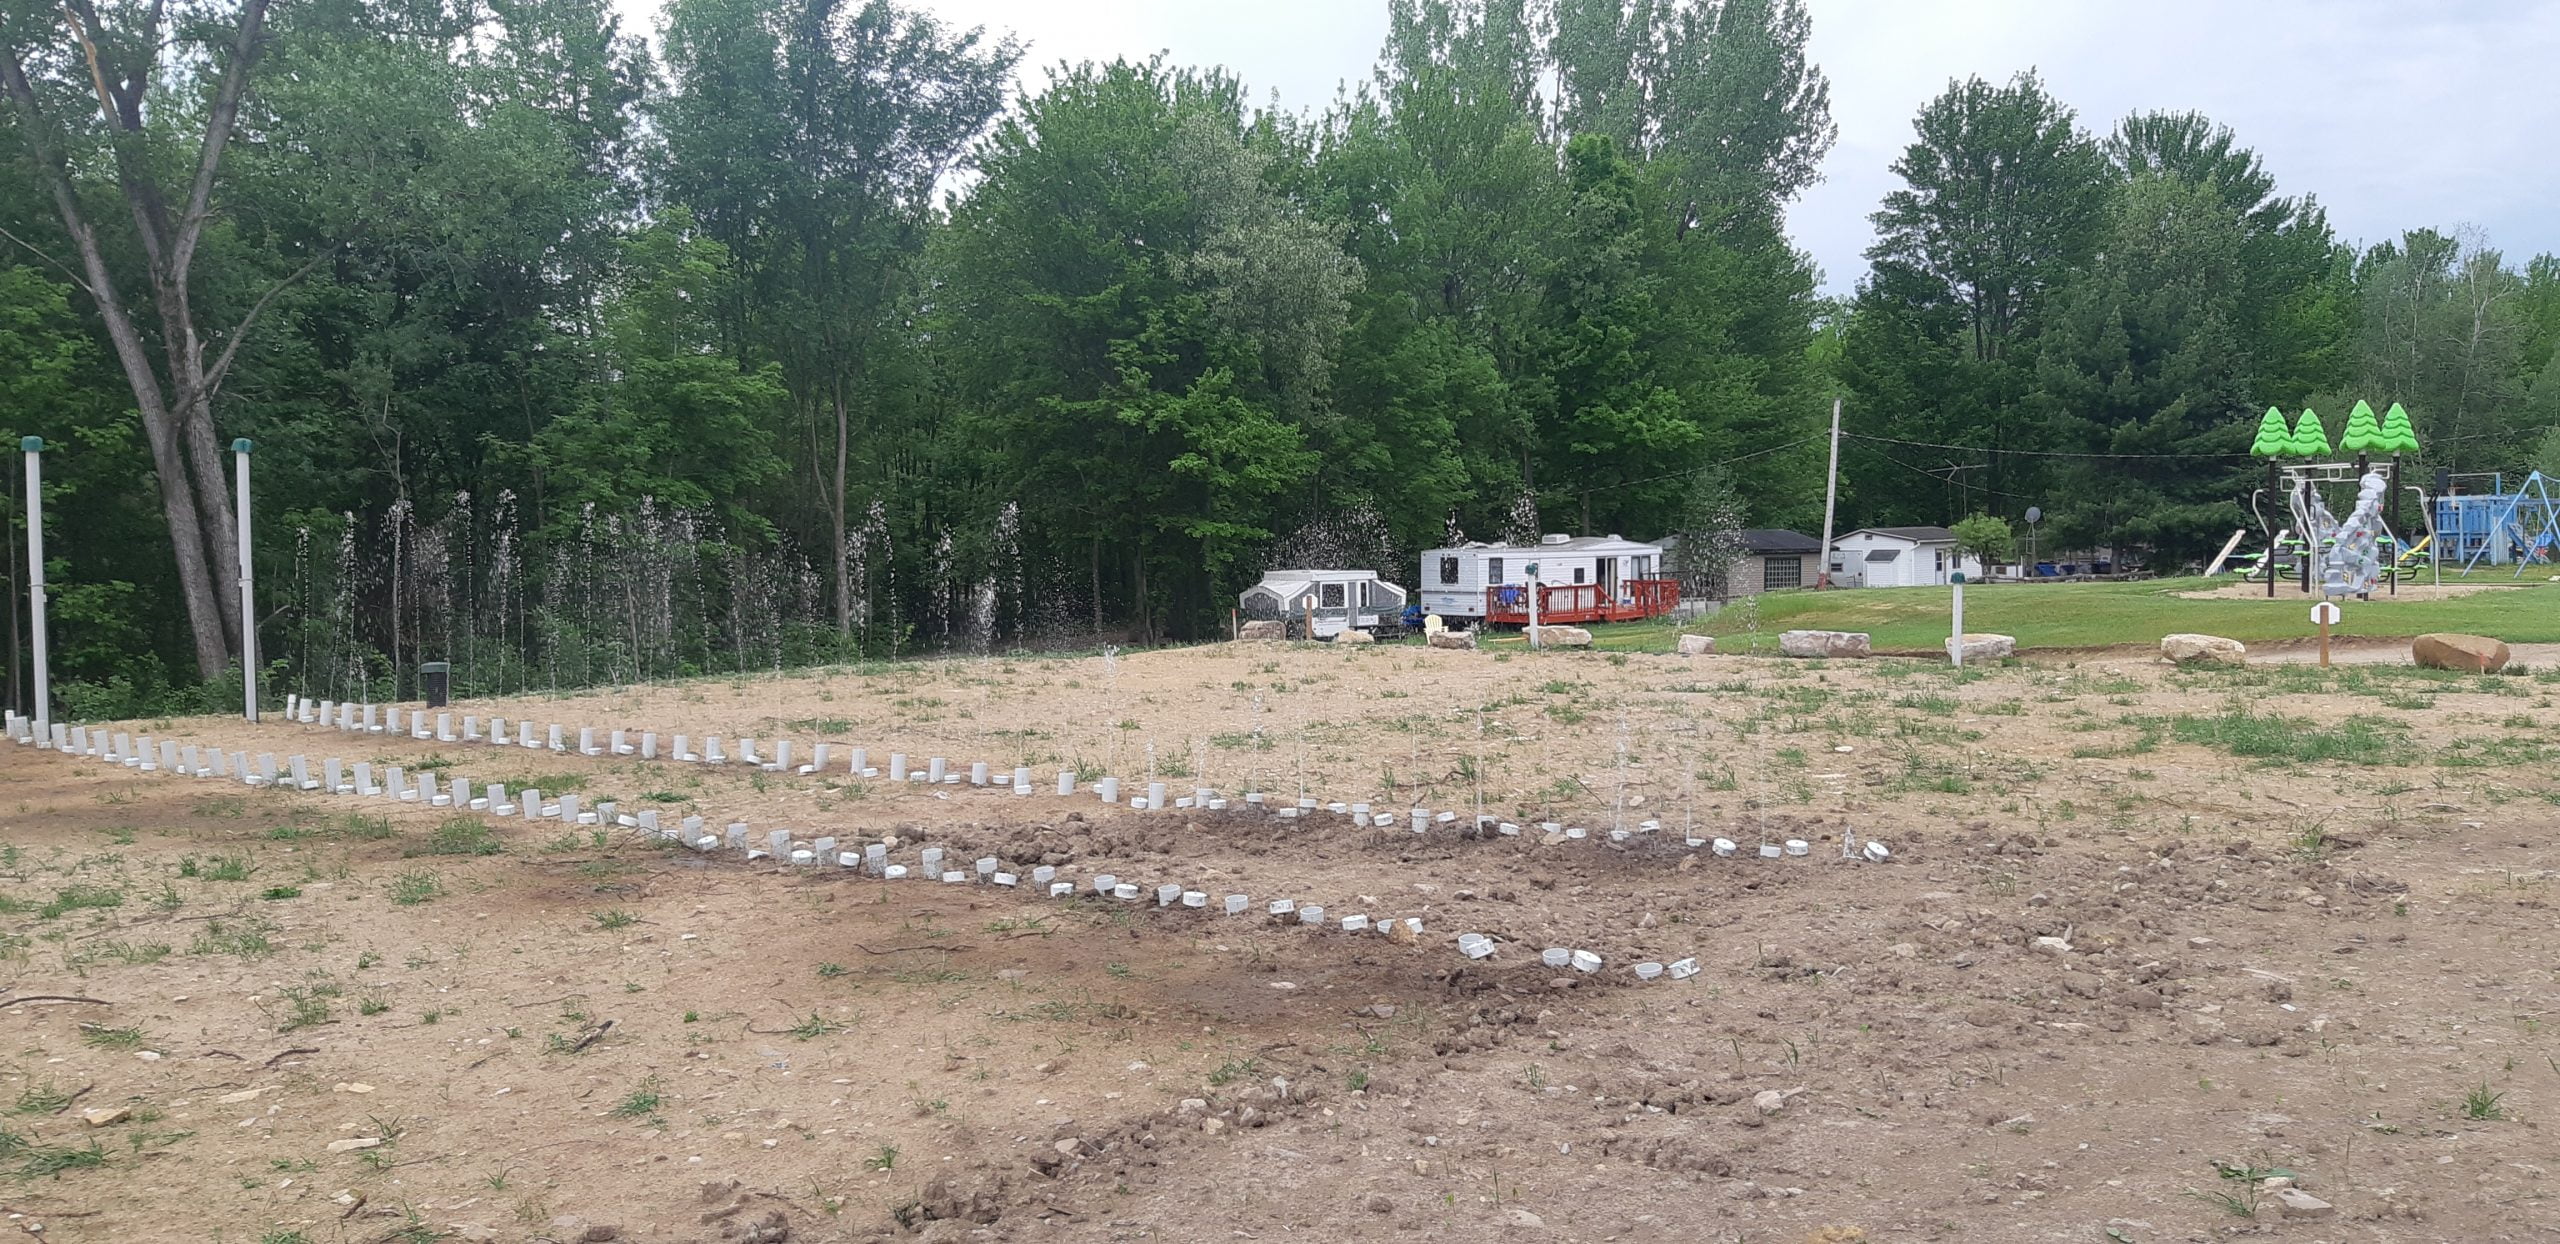 Chemical phosphorus removal for a lakeside campground - Case Study 6